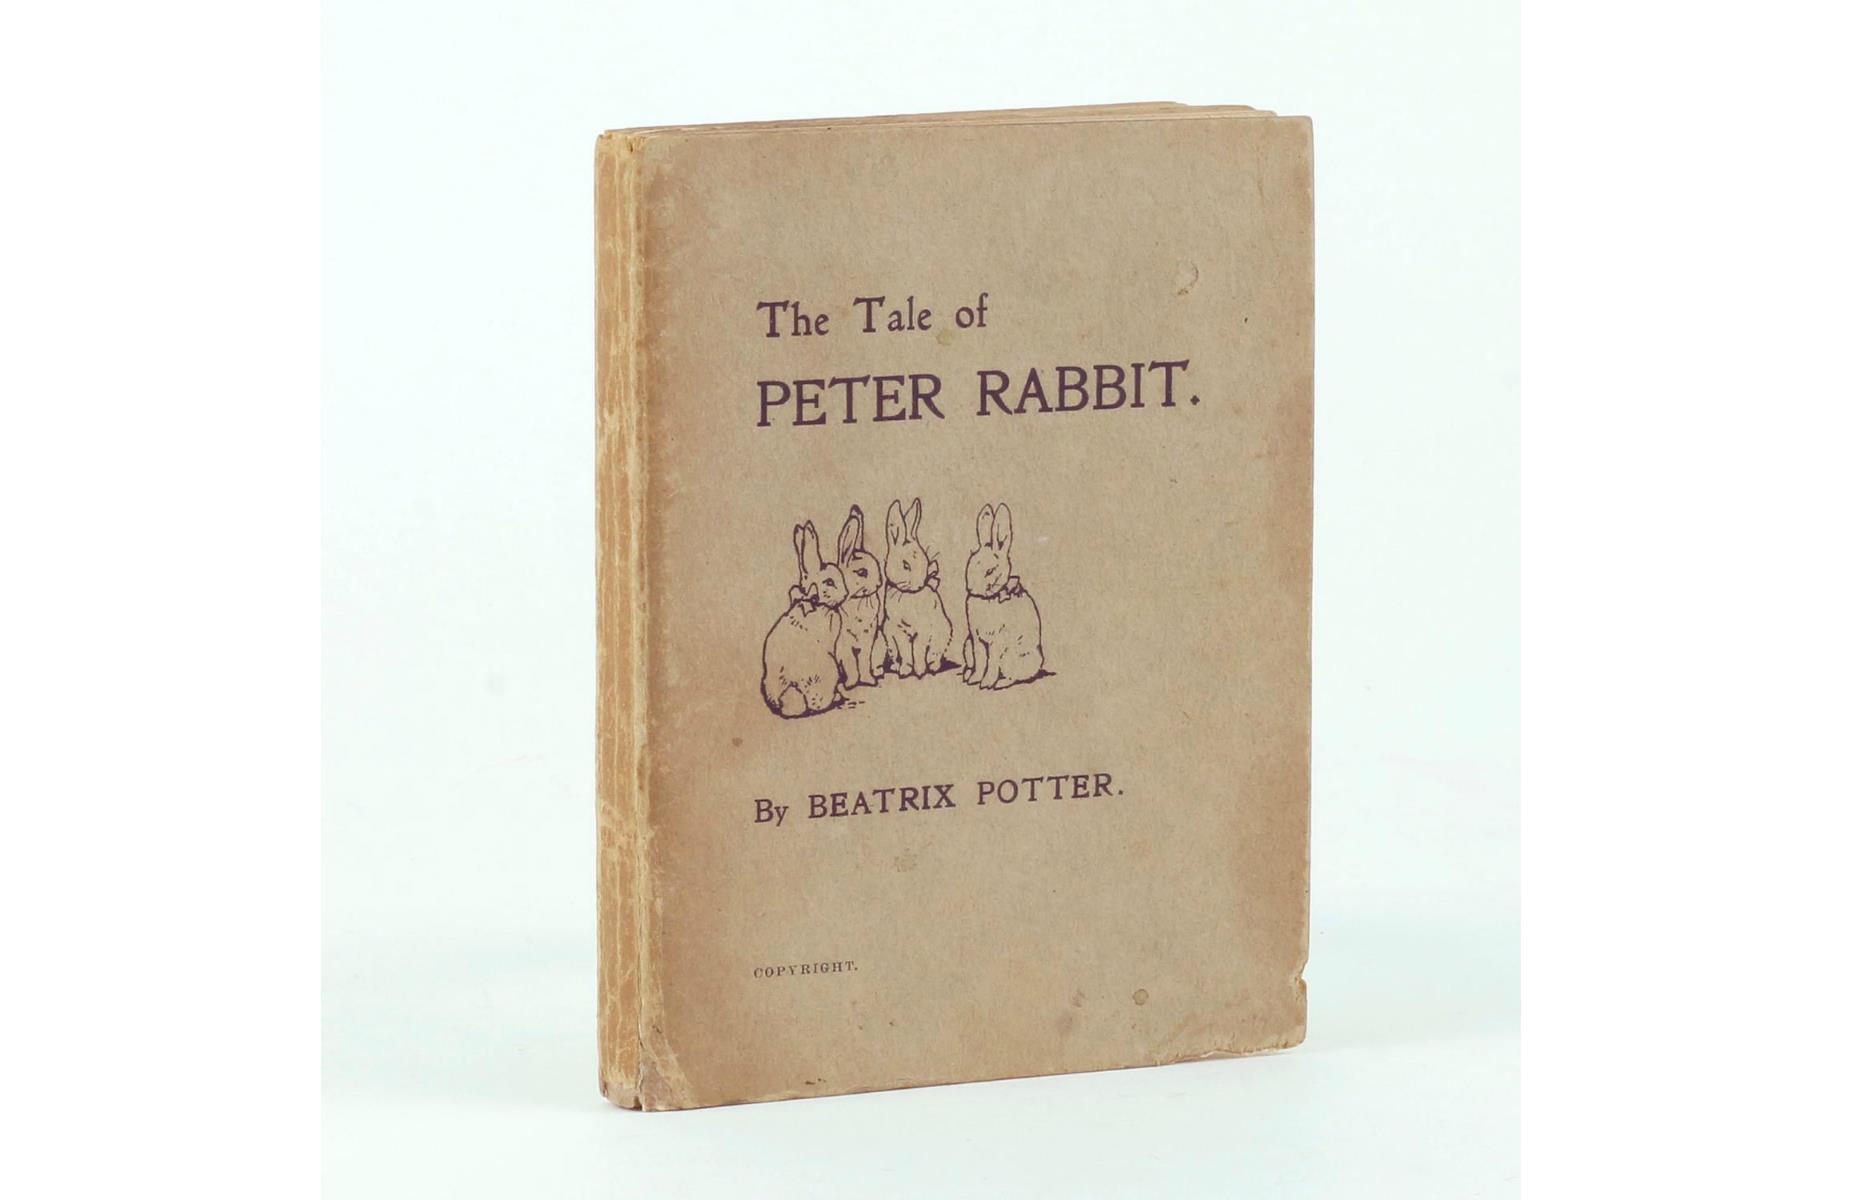 The Tale of Peter Rabbit: up to $89,220 (£72,000)